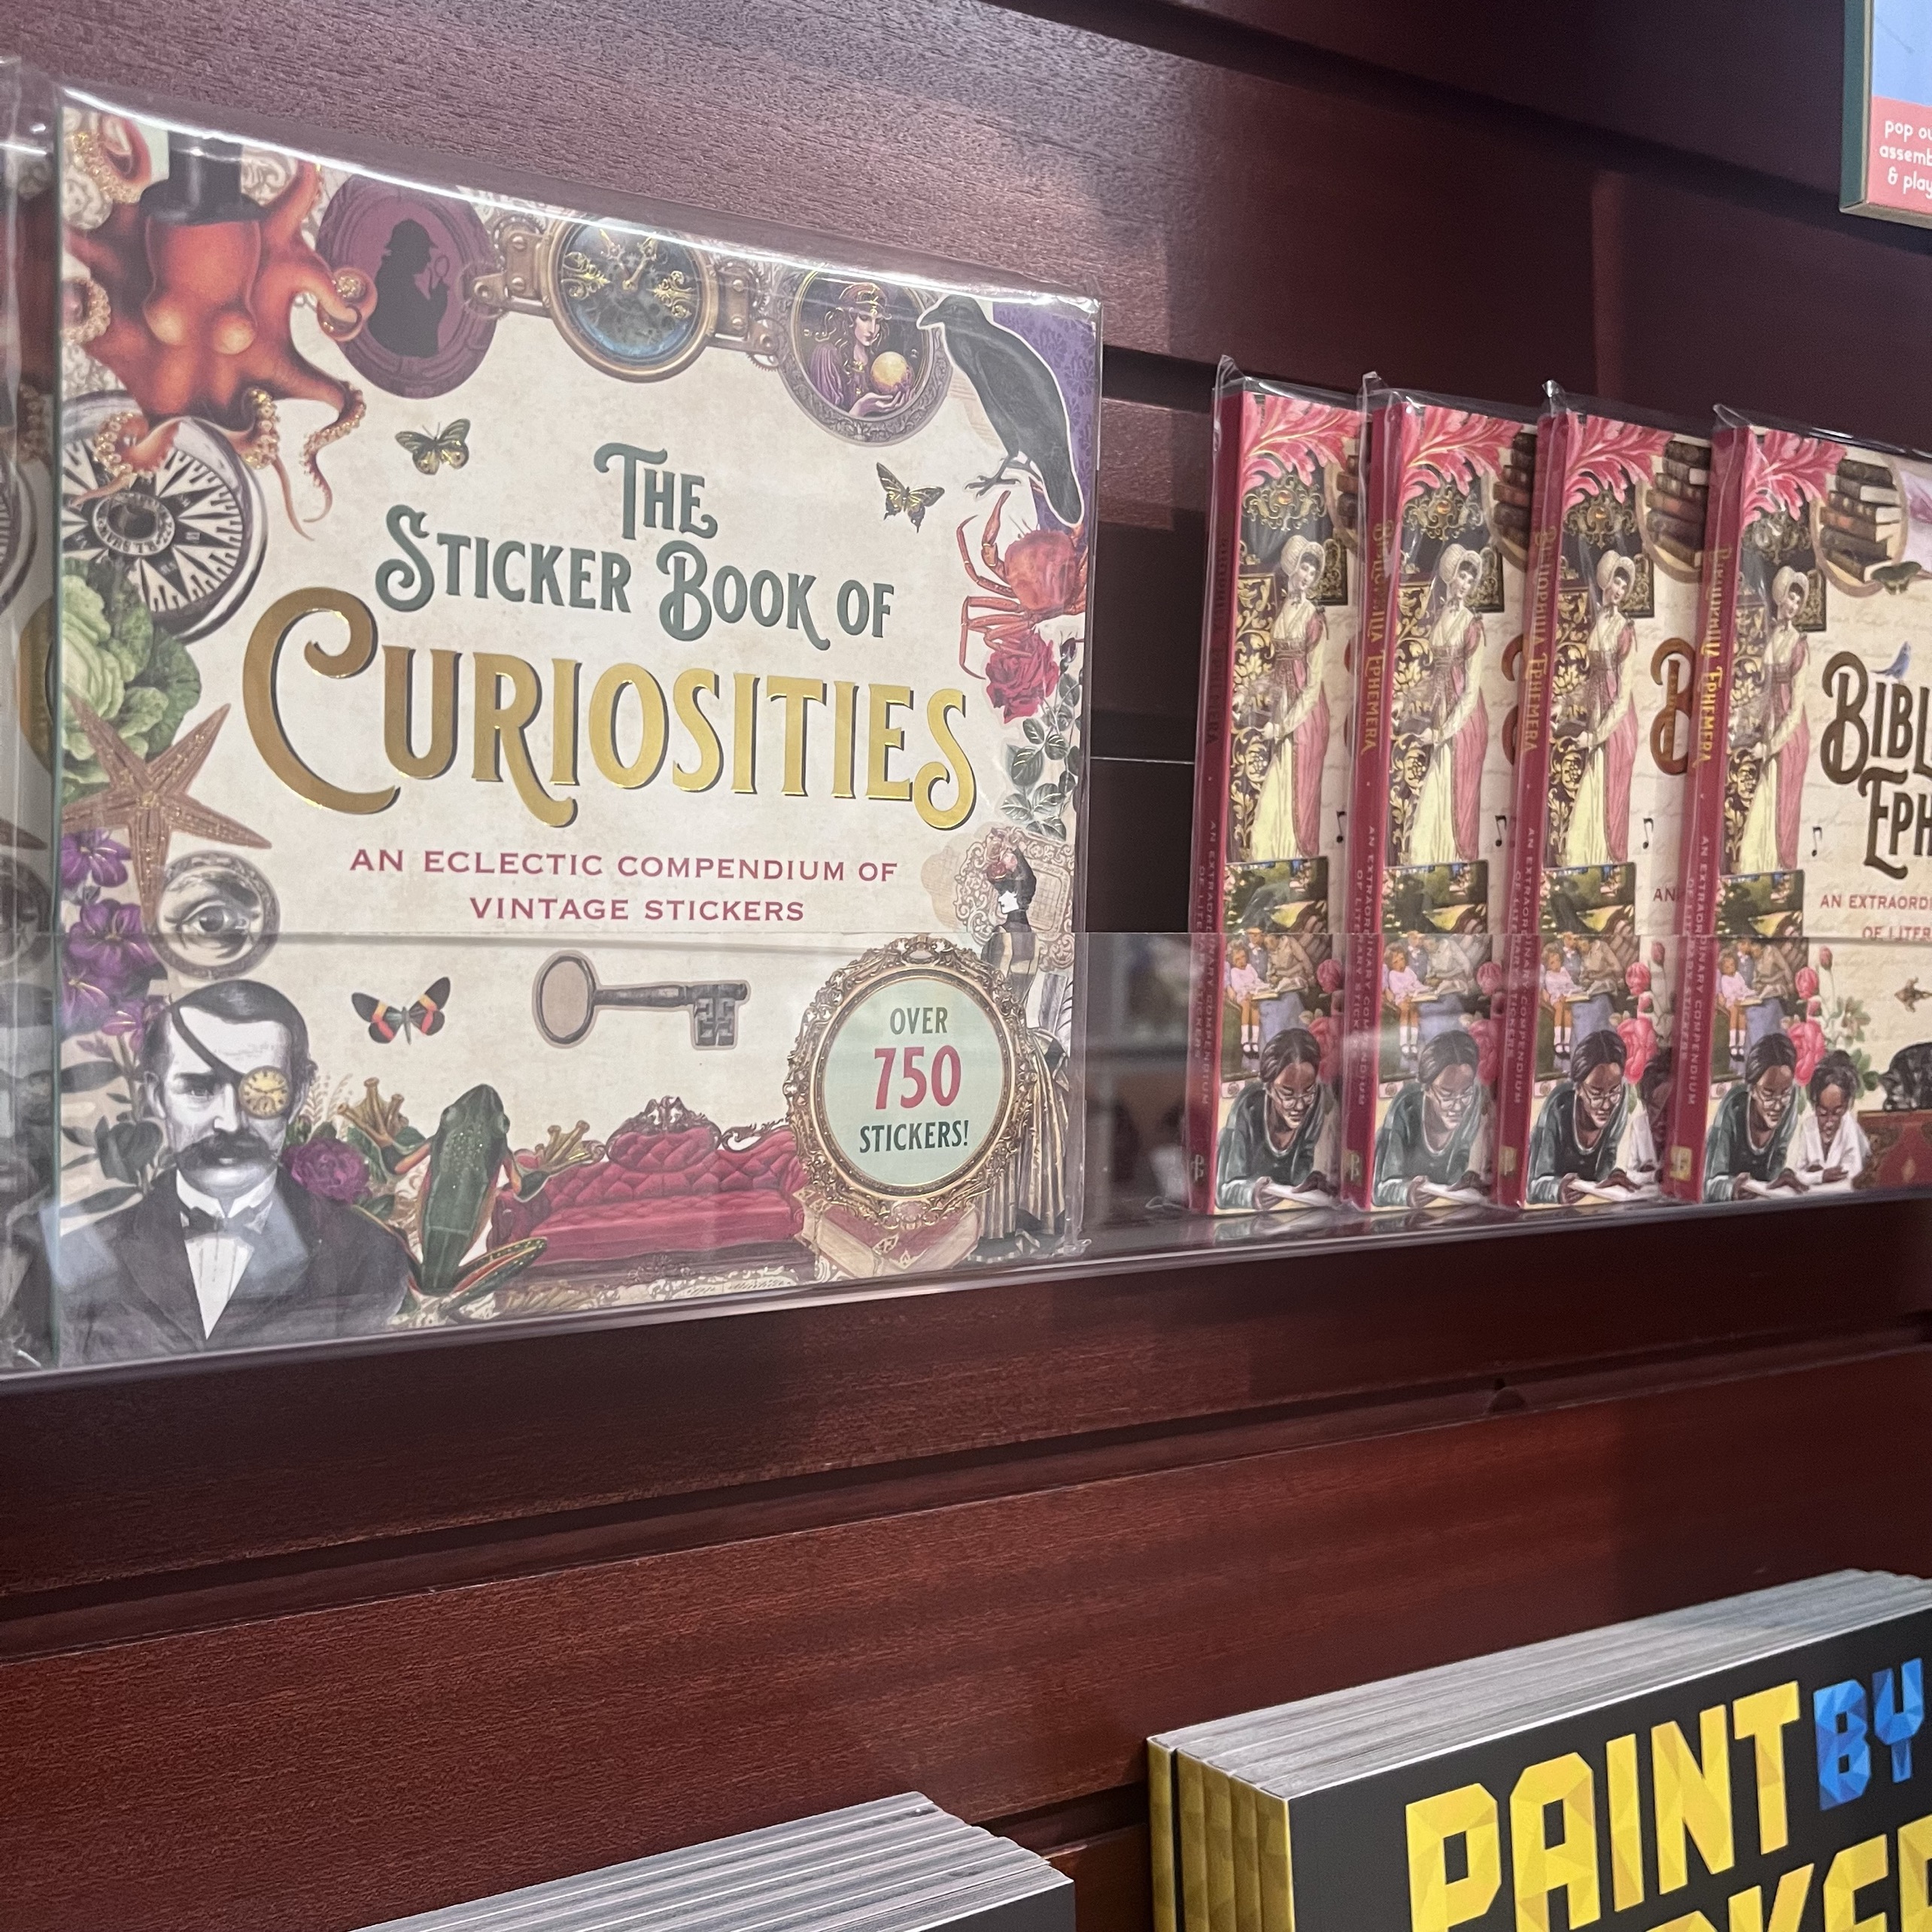 The Sticker Book of Curiosities sits on a shelf among other books.